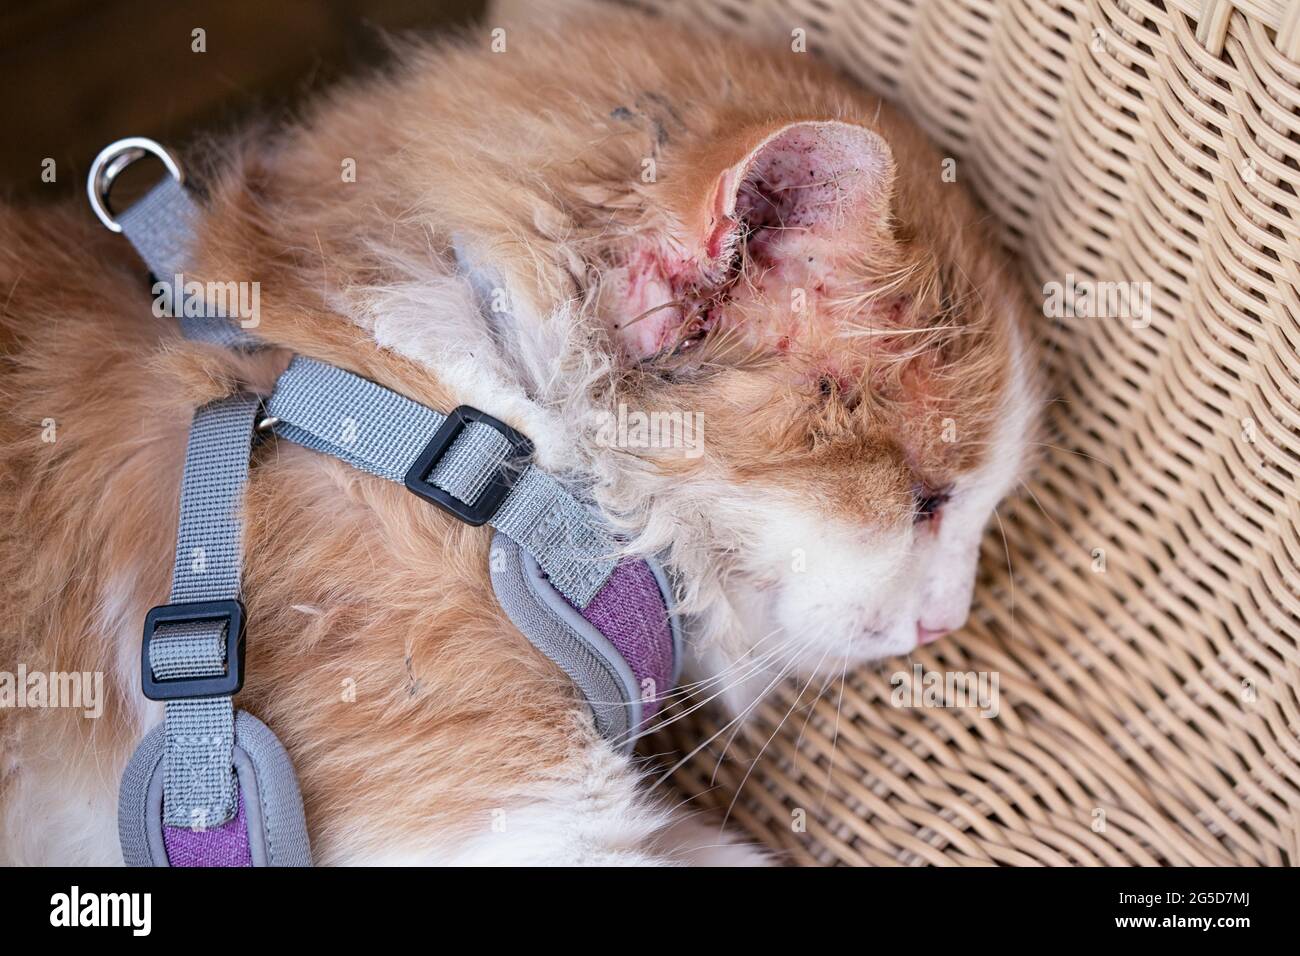 Exhausted injured cat with a swollen eye and scratched injured ear, lies in close-up. Stock Photo